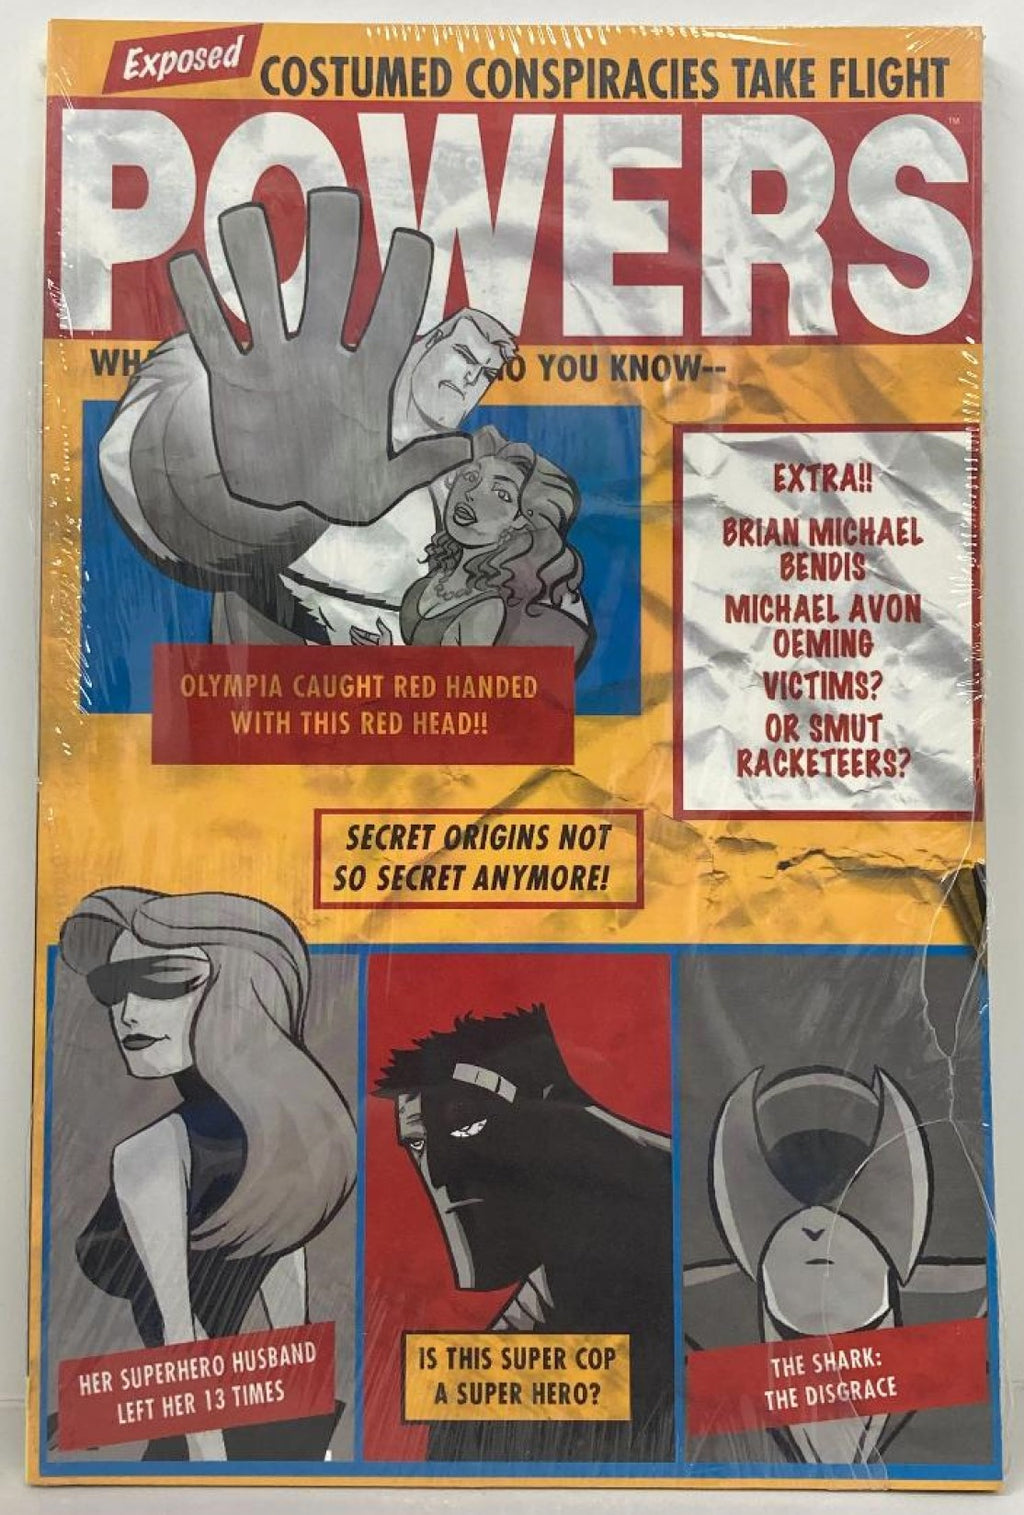 Powers Volume 3 Little Deaths - The Comic Warehouse